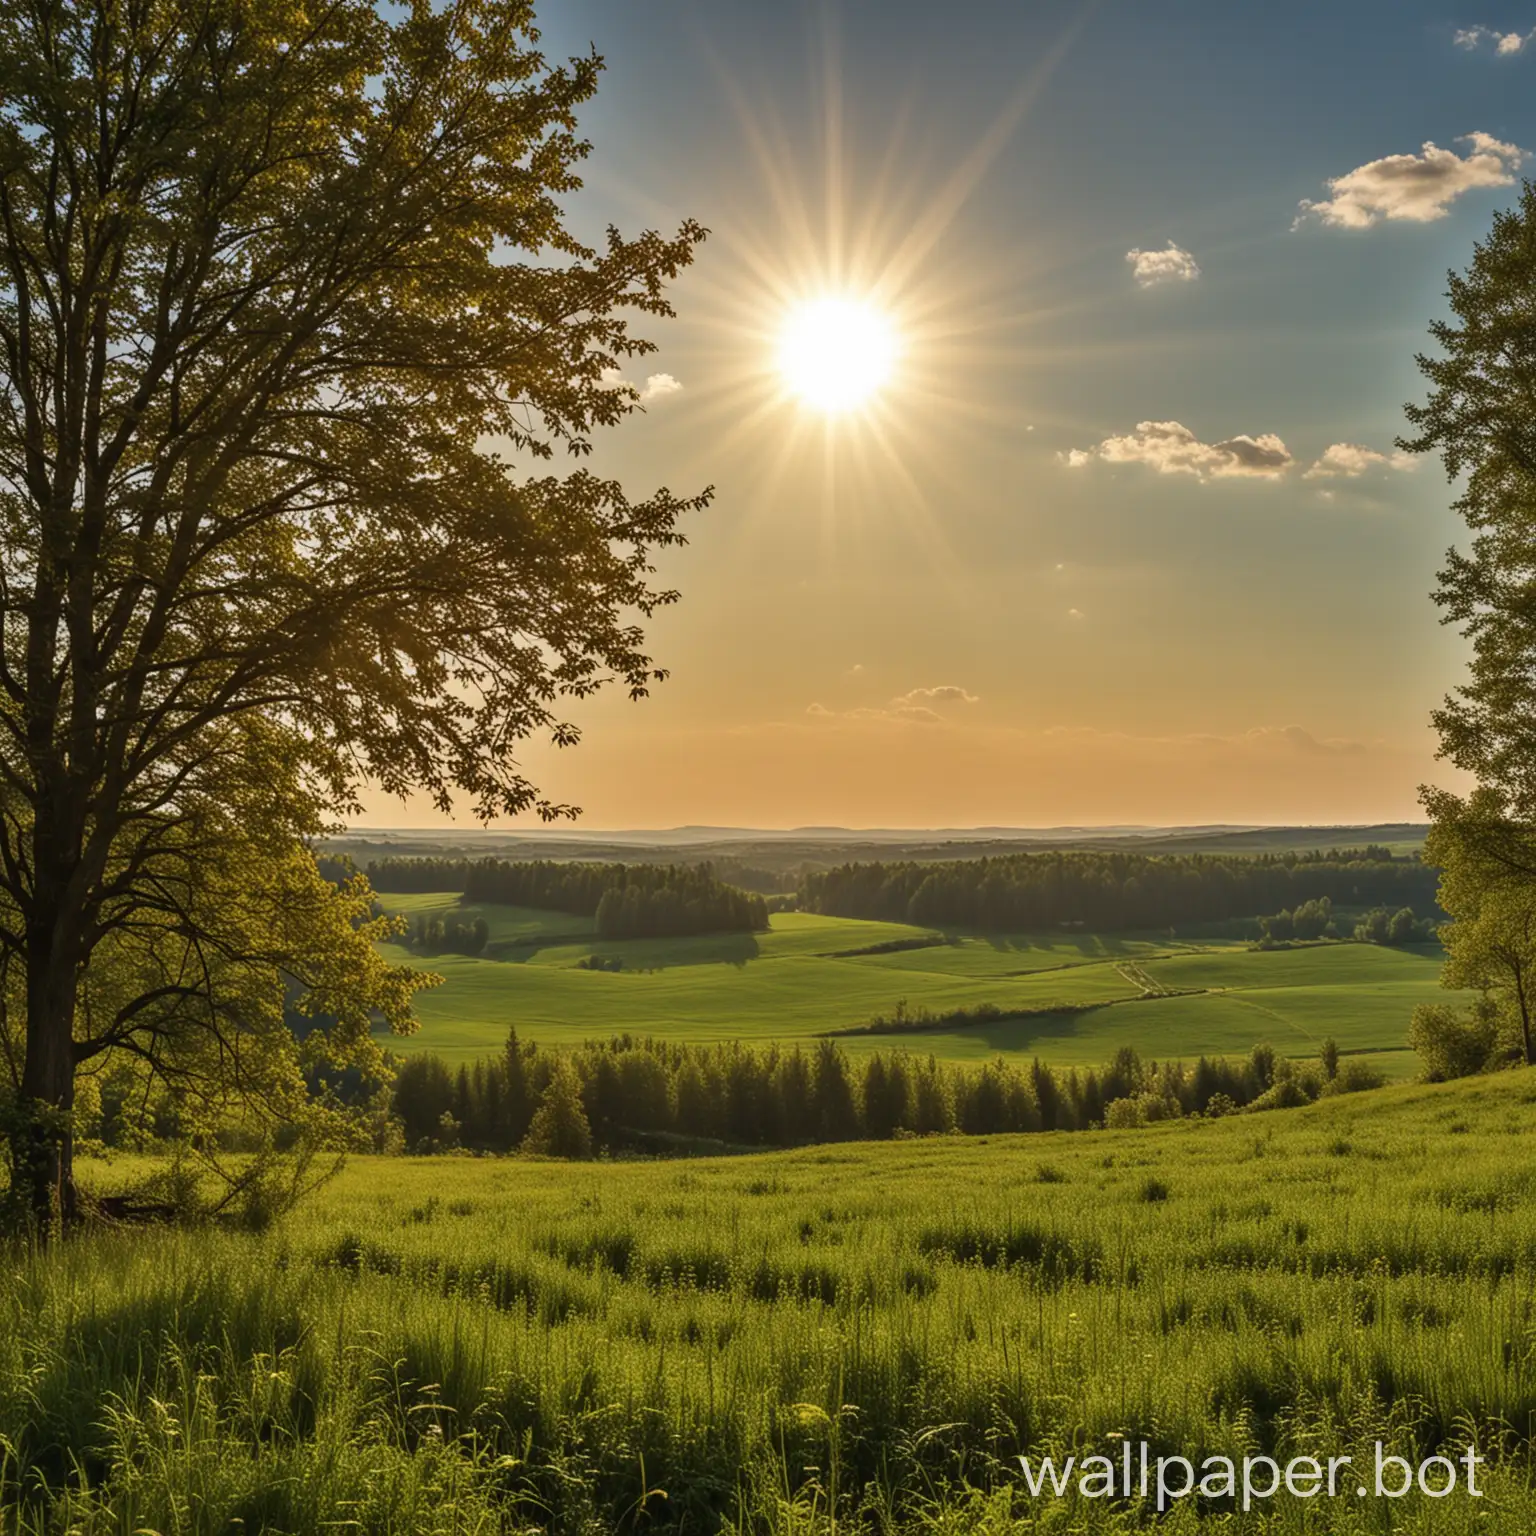 THE SUN,BEAUTIFUL FIELDS,FOREST IN THE DISTANCE, BEAUTIFUL NATURE